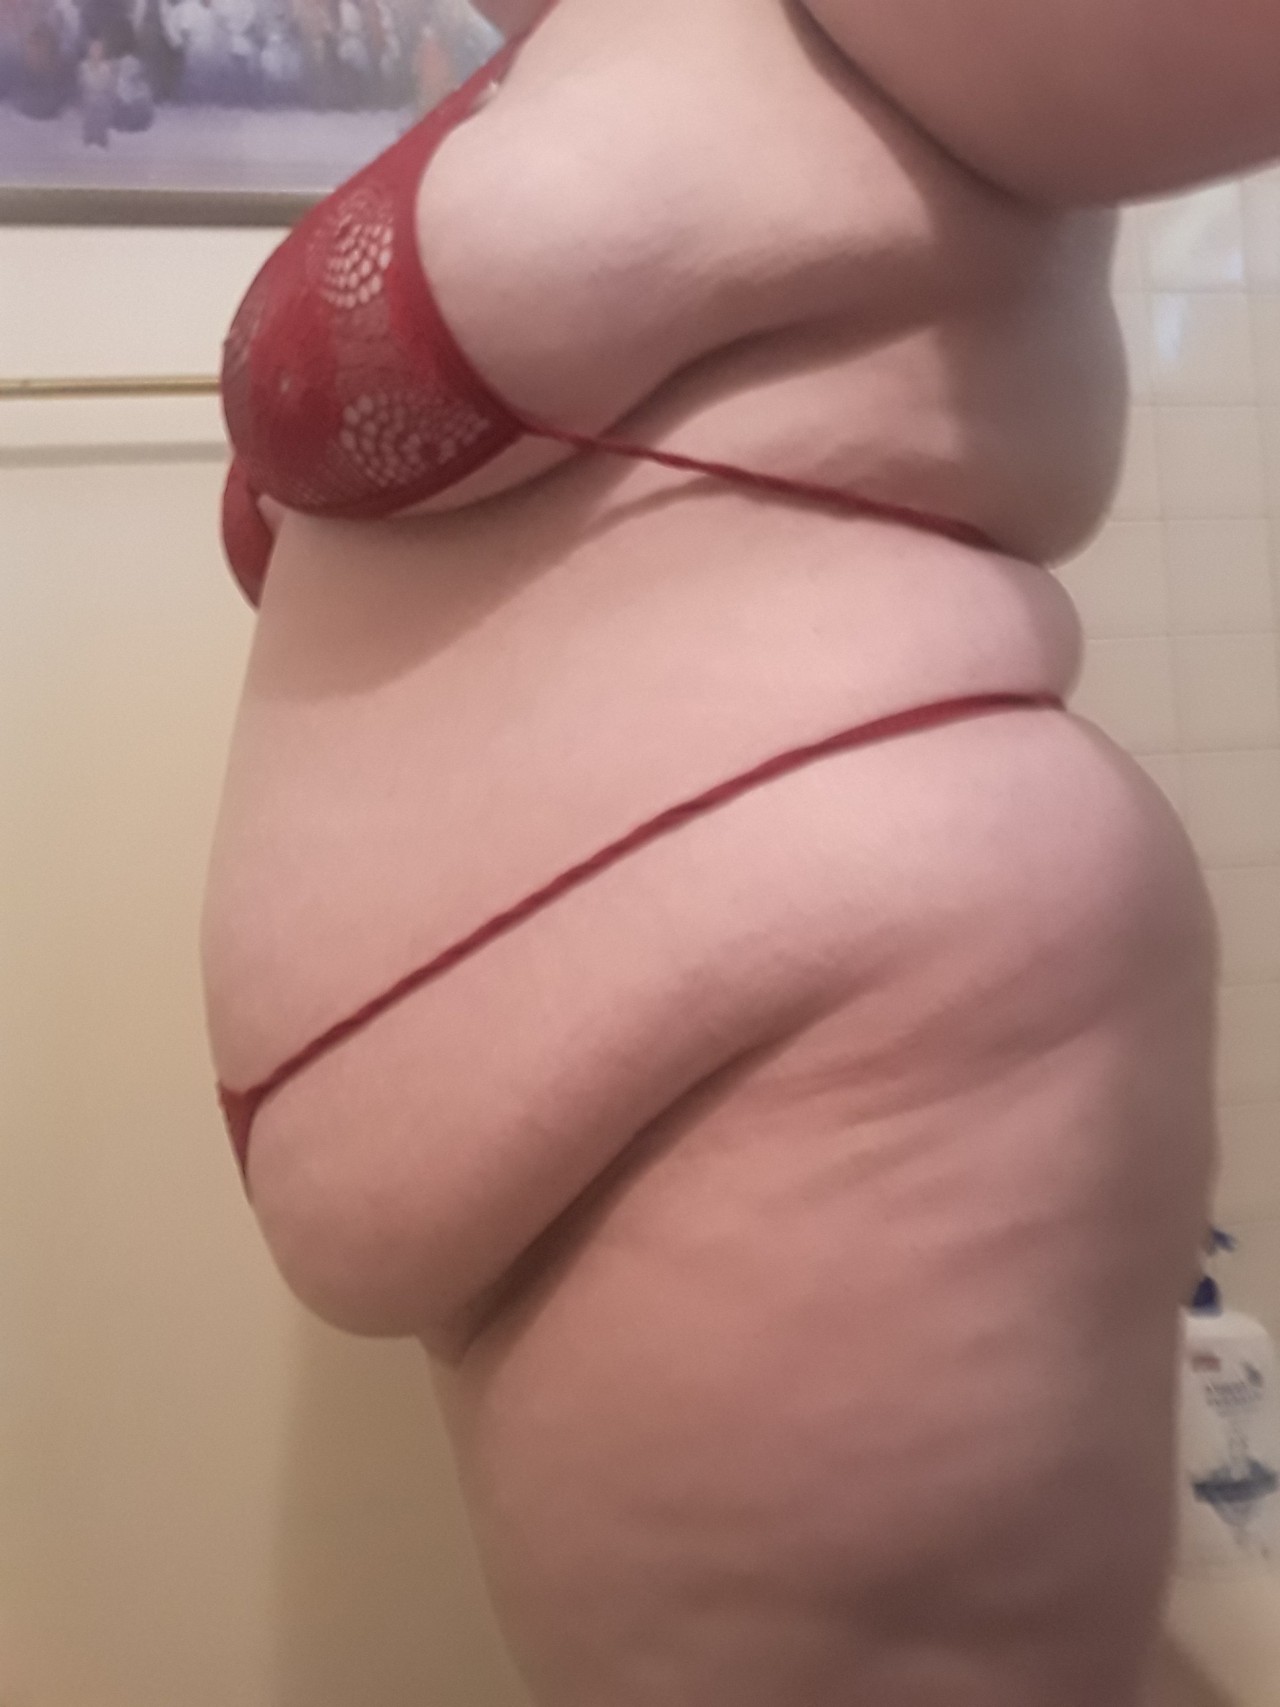 bbwstonerr:Before and after I did a bloat this morning 💋